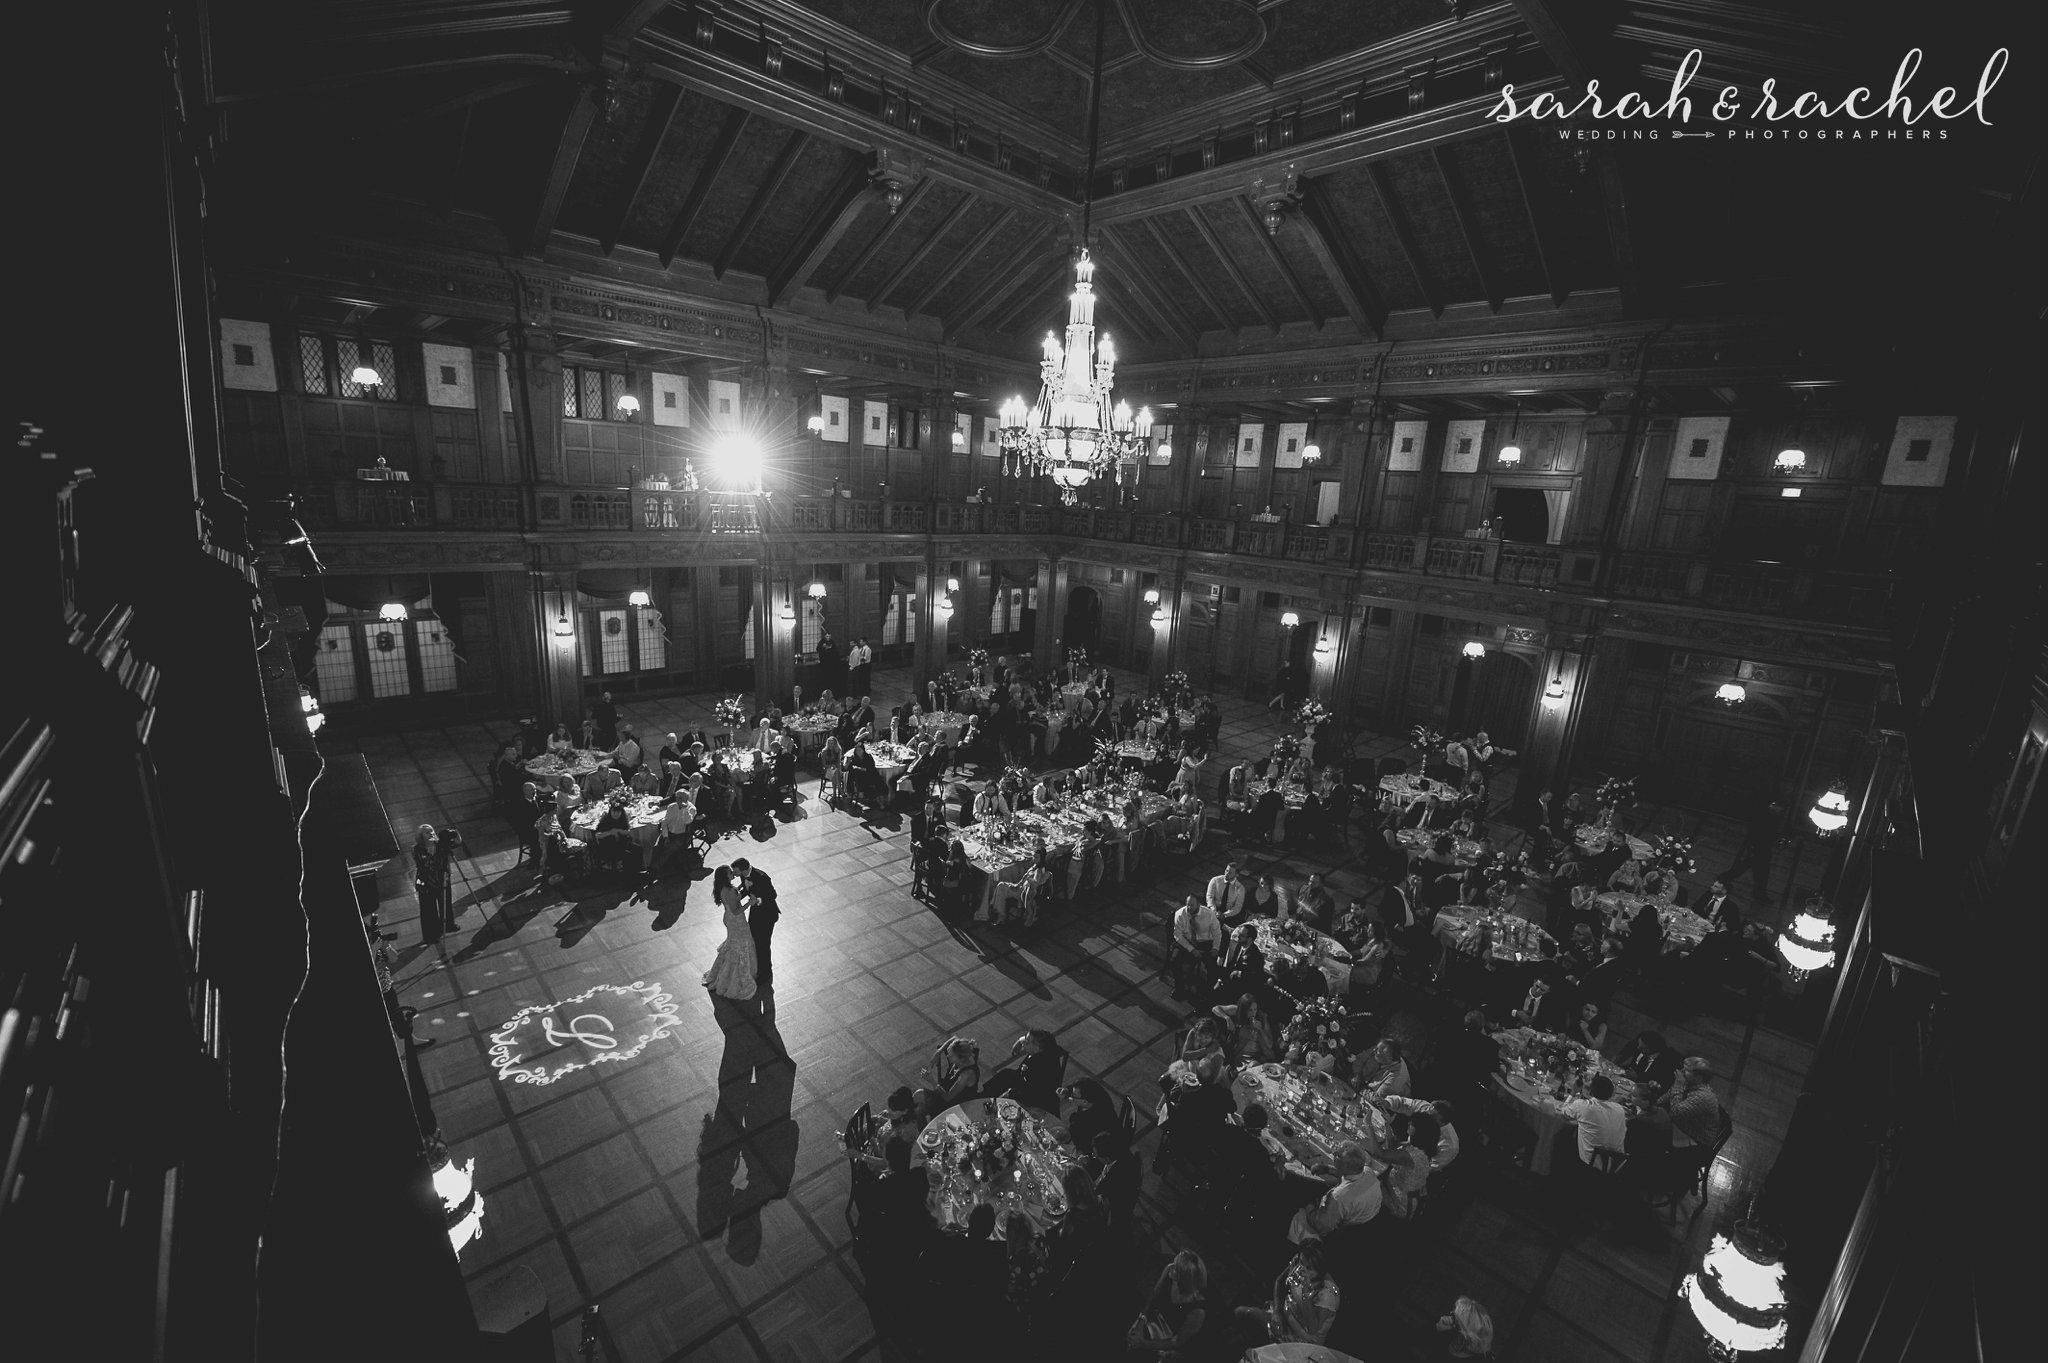 Scottish Rite Cathedral | Gold wedding details | Classy gold wedding